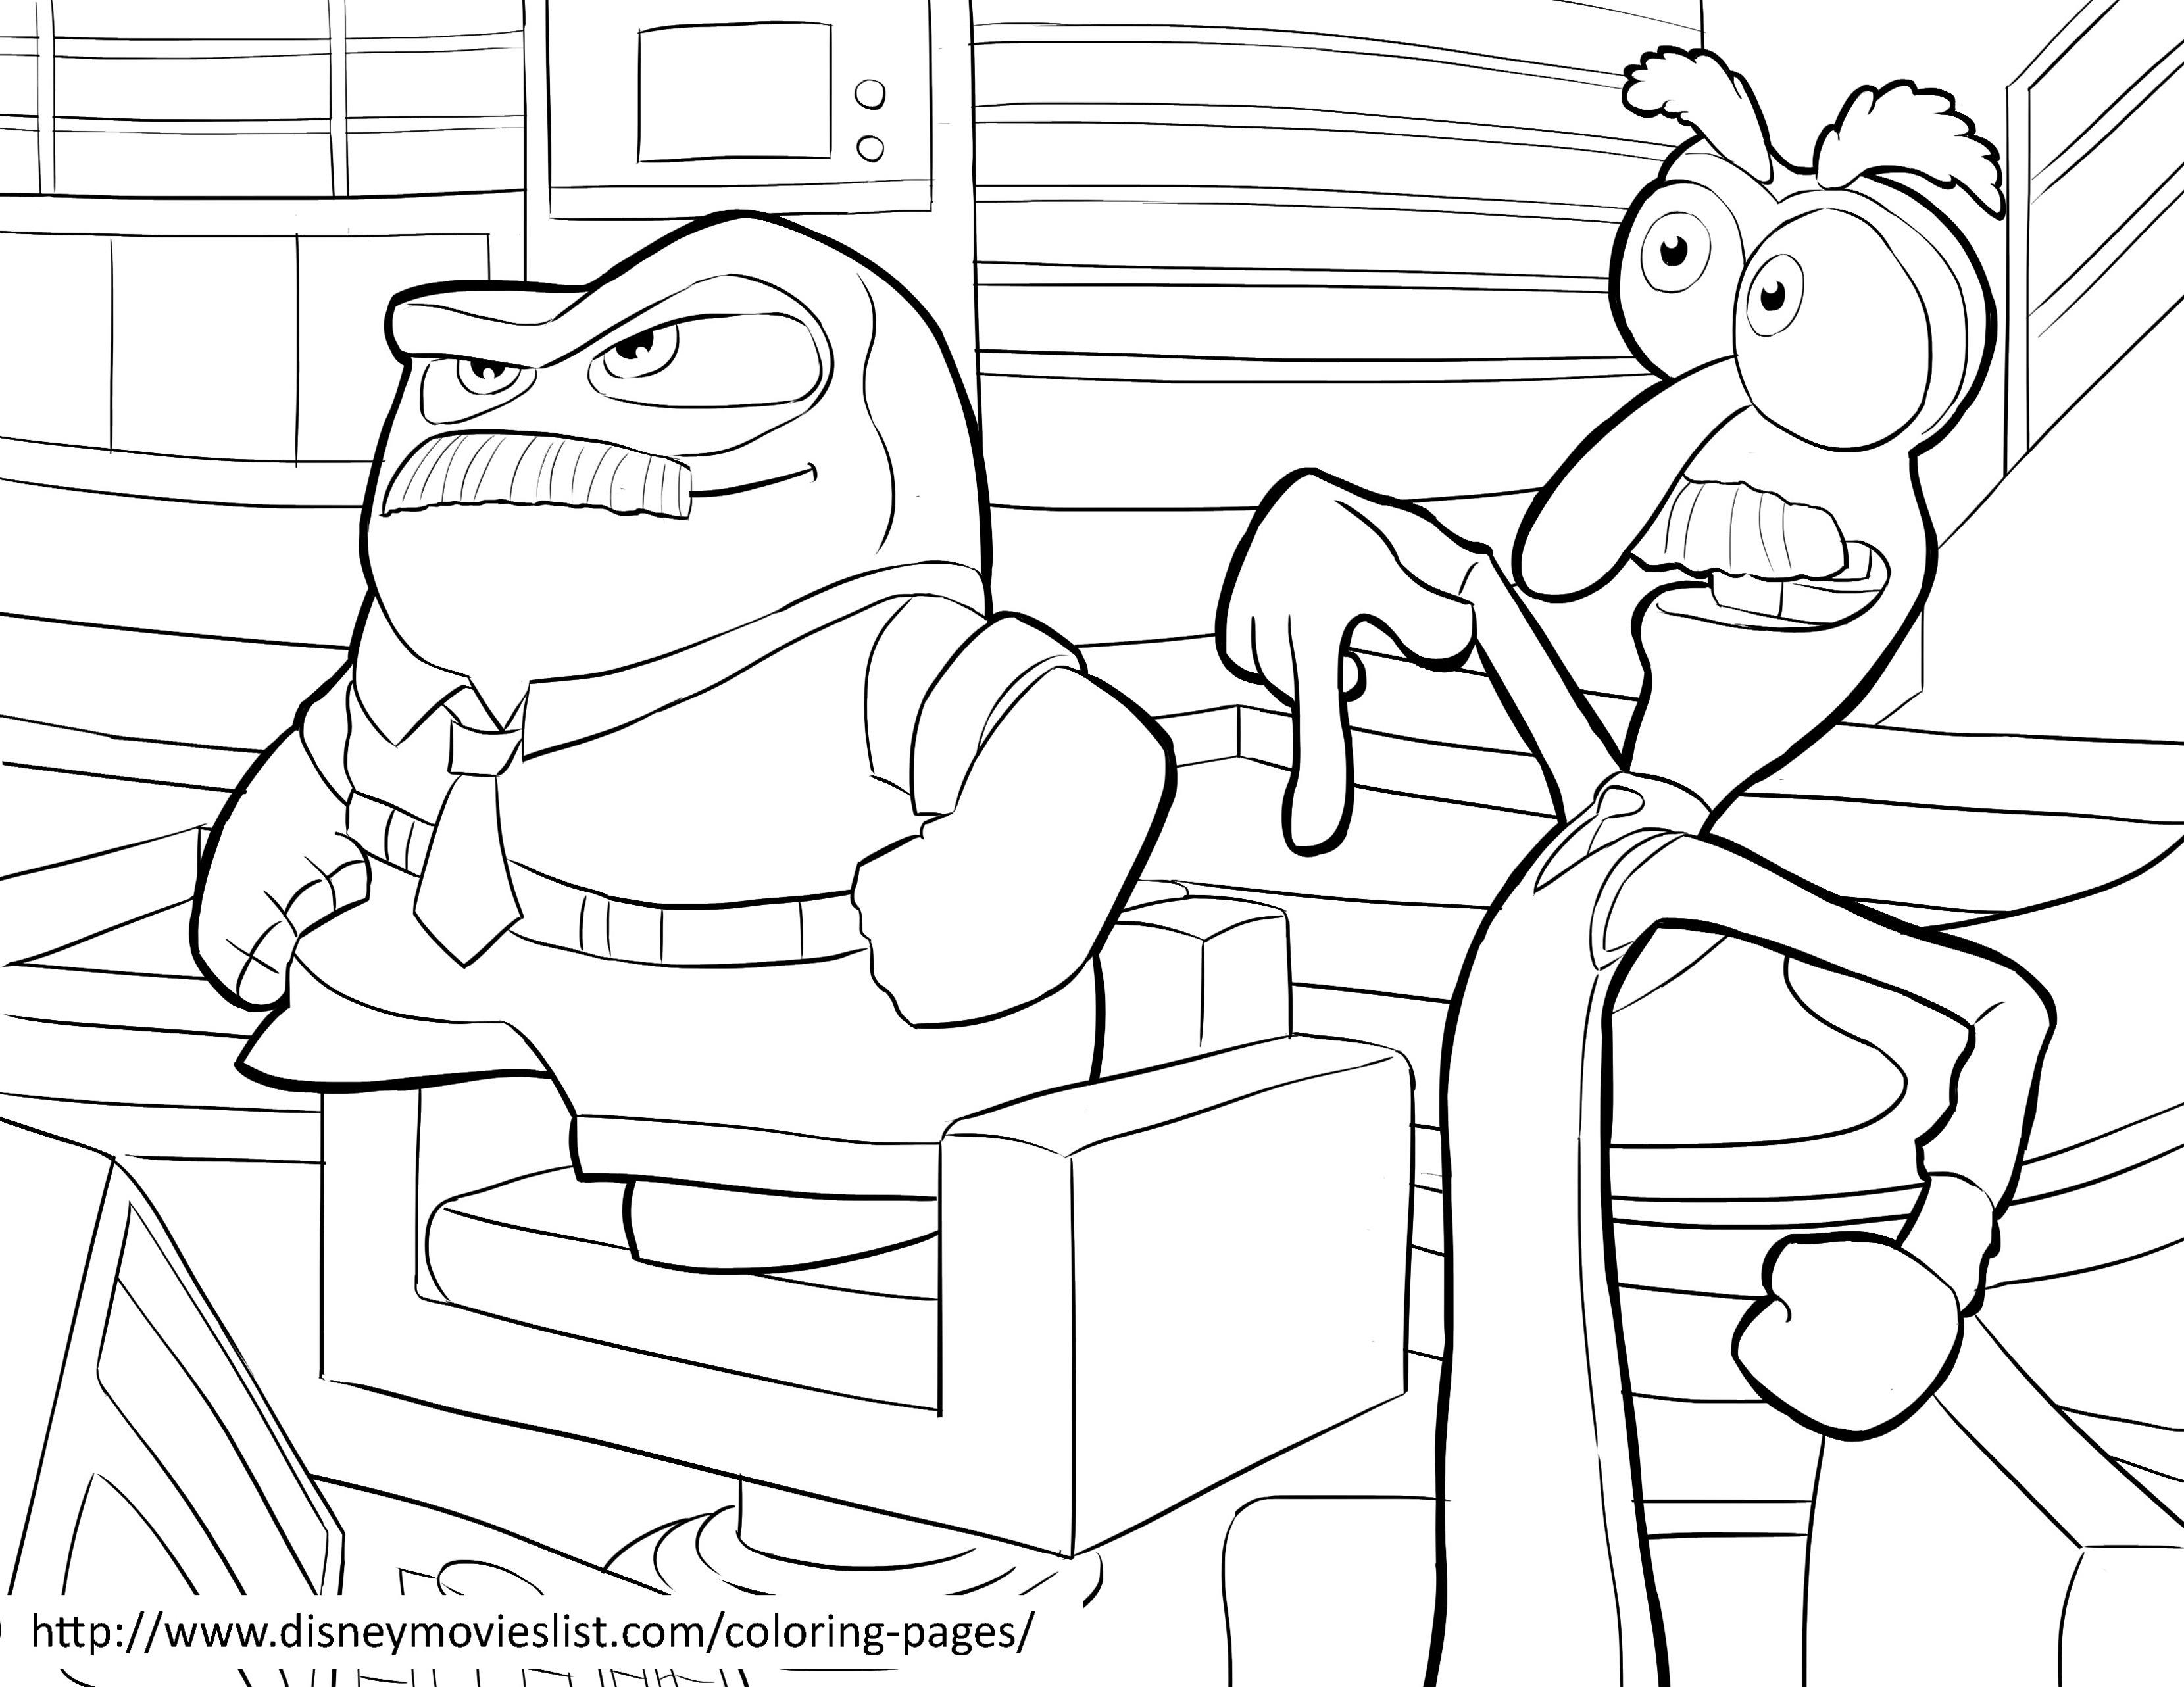 Incredible Inside Out coloring page to print and color for free : Fear and Anger